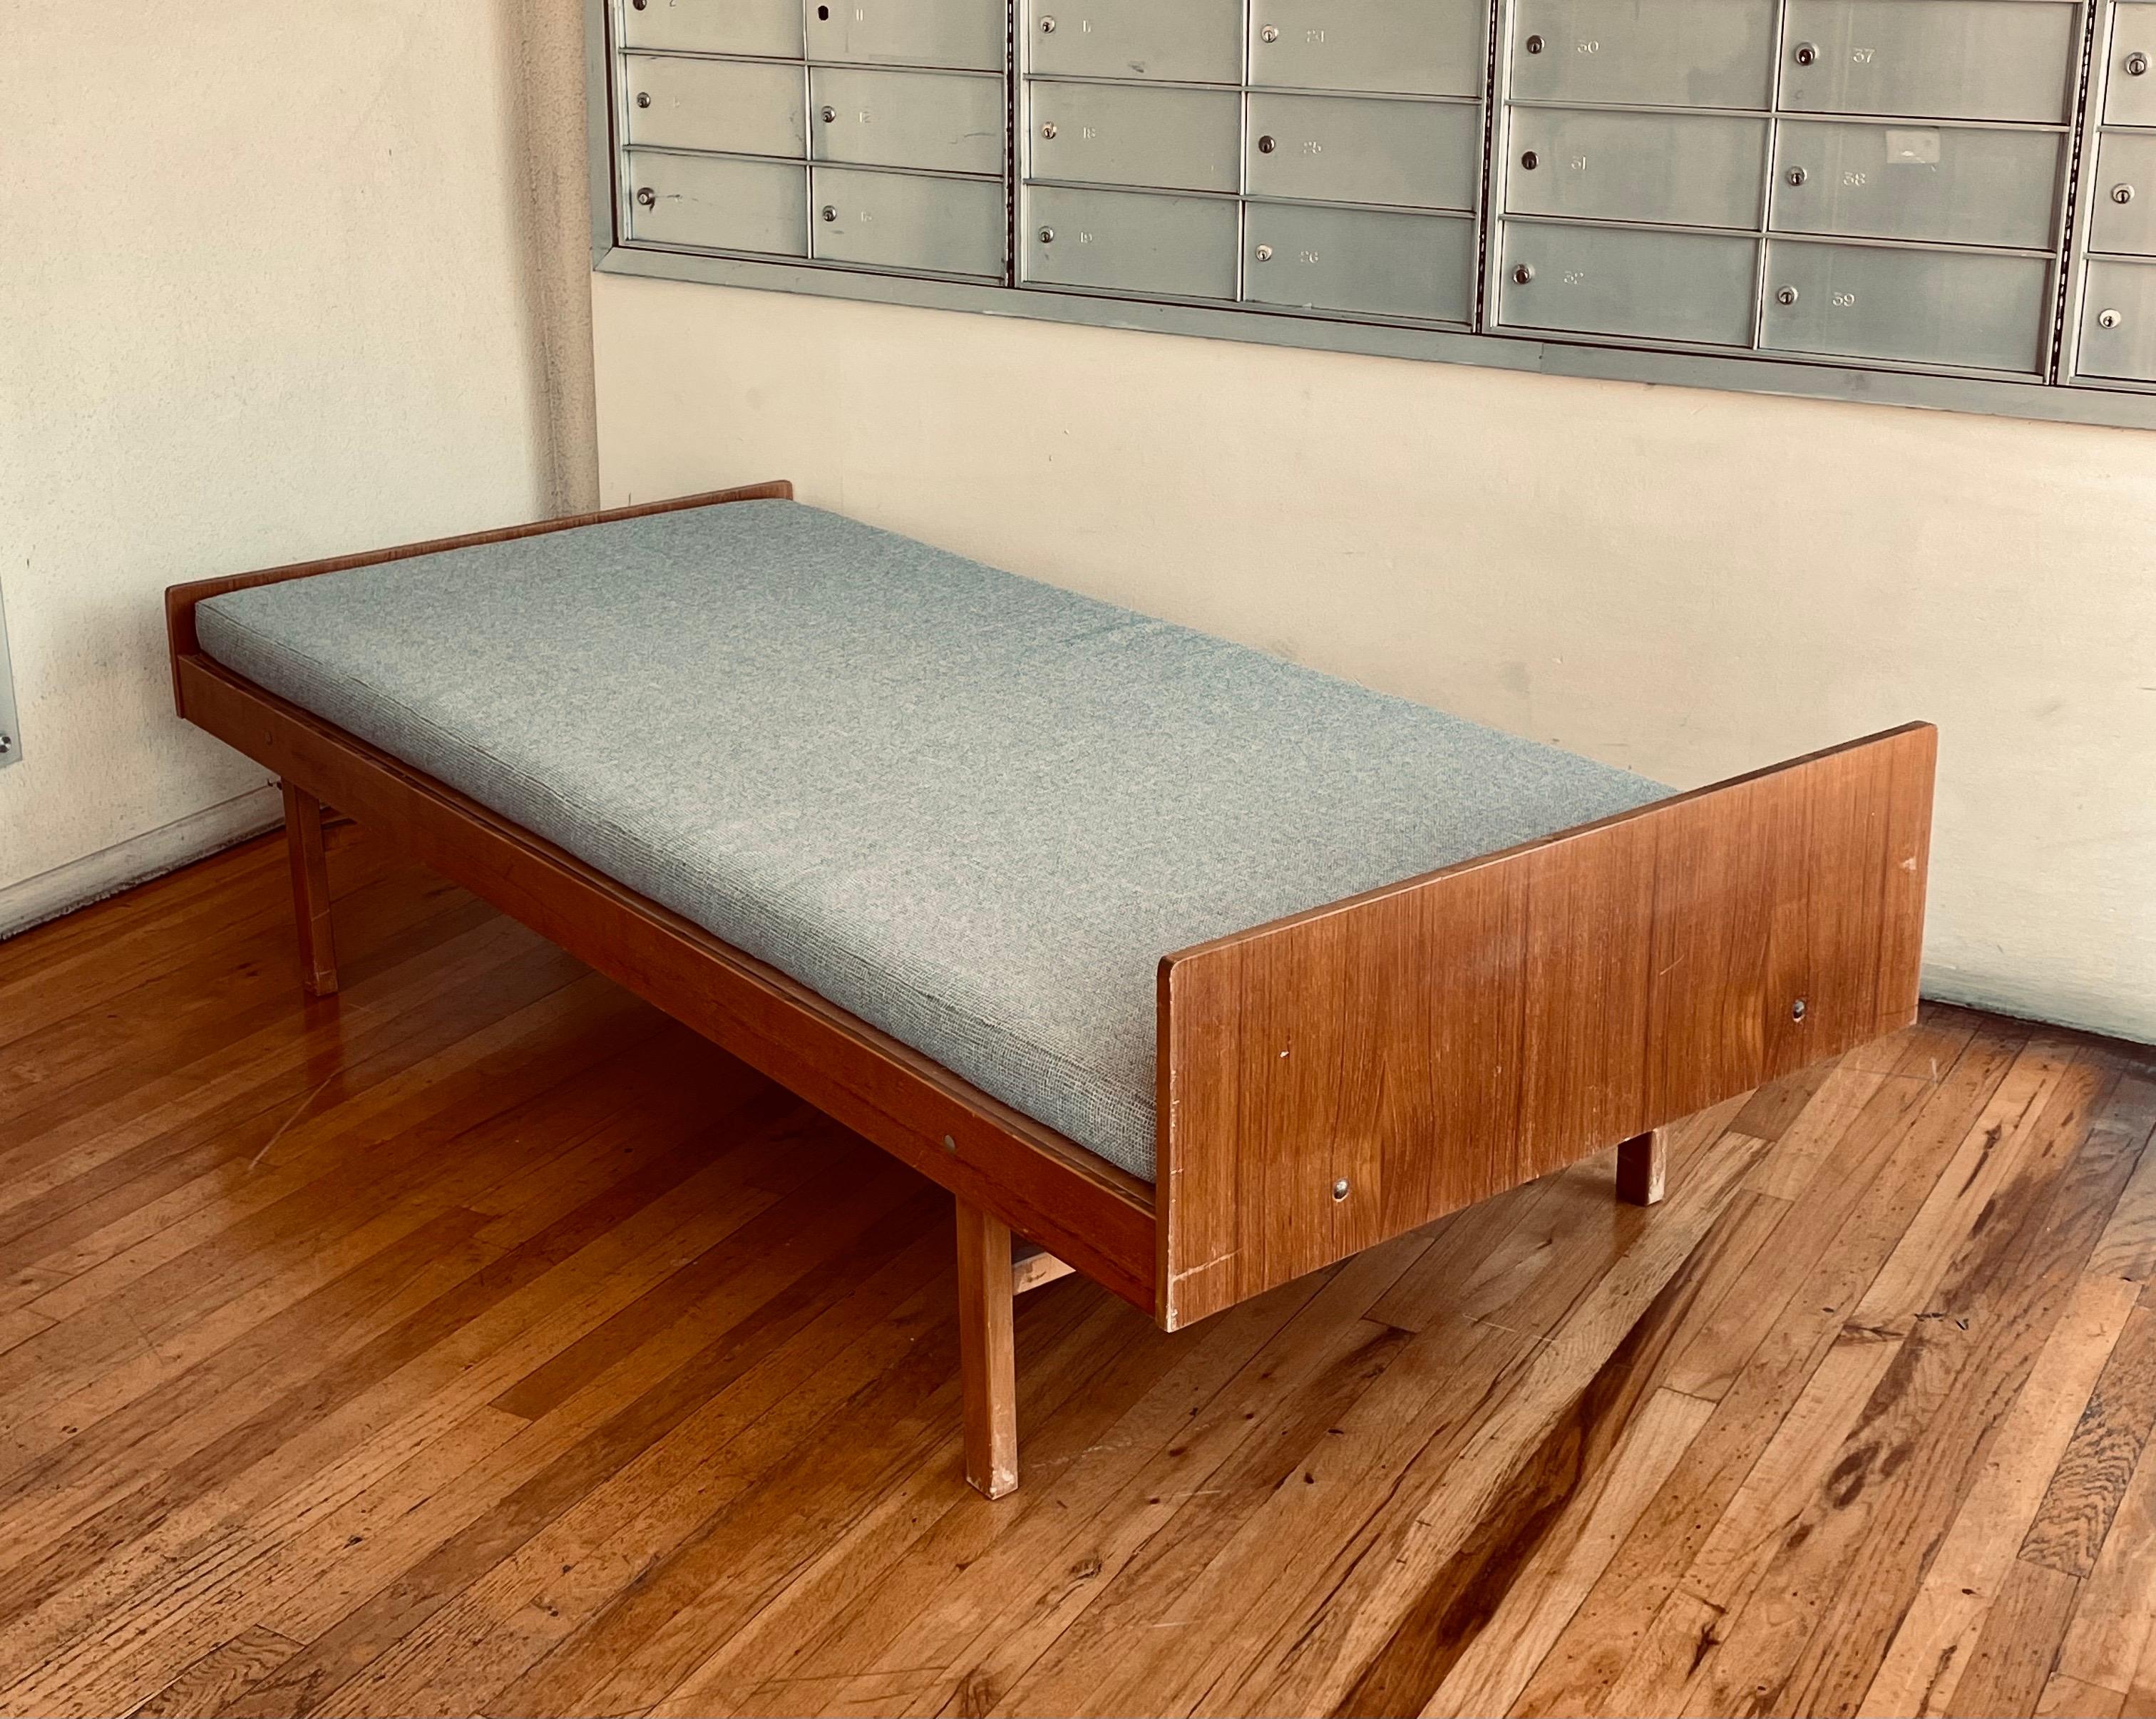 Simple Elegant Danish teak daybed great for an extra guest room, recovered with Knoll gray fabric we have oiled and cleaned the daybed it has its original finish very clean simple solid and sturdy.